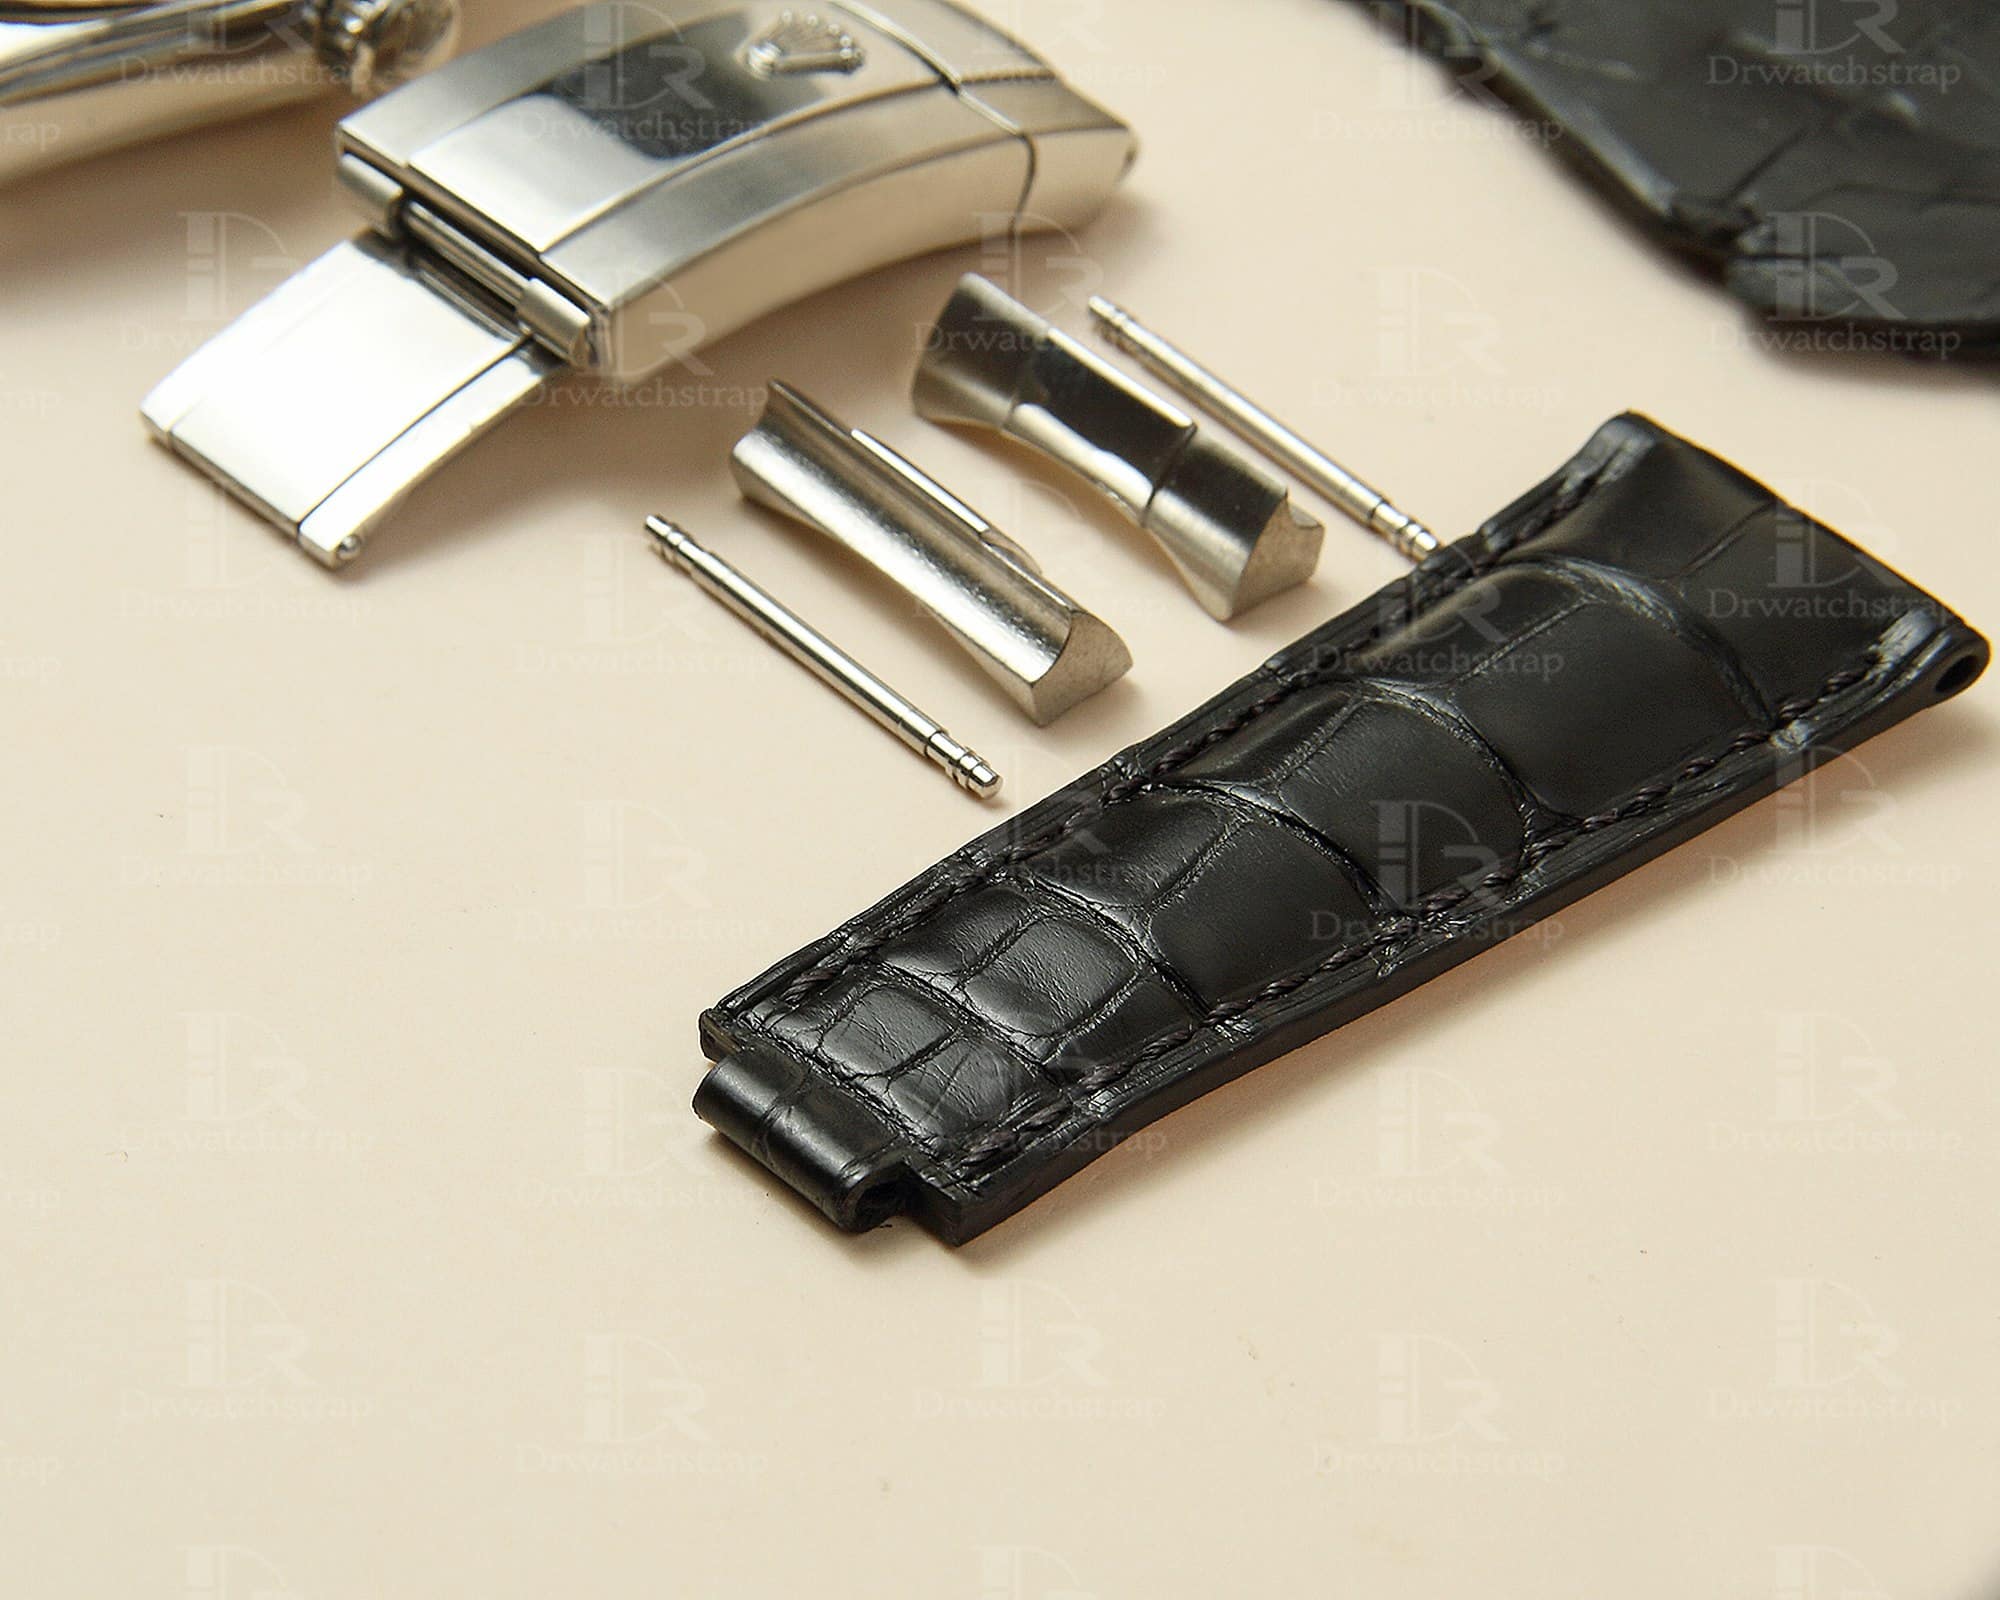 Best high-end quality alligator black Rolex leather watch straps and watch bands replacement for Rolex Submariner & Sky-Dweller luxury watches - Aftermarket watch strap online for sale at a low price 20mm 21mm 22mm lug size